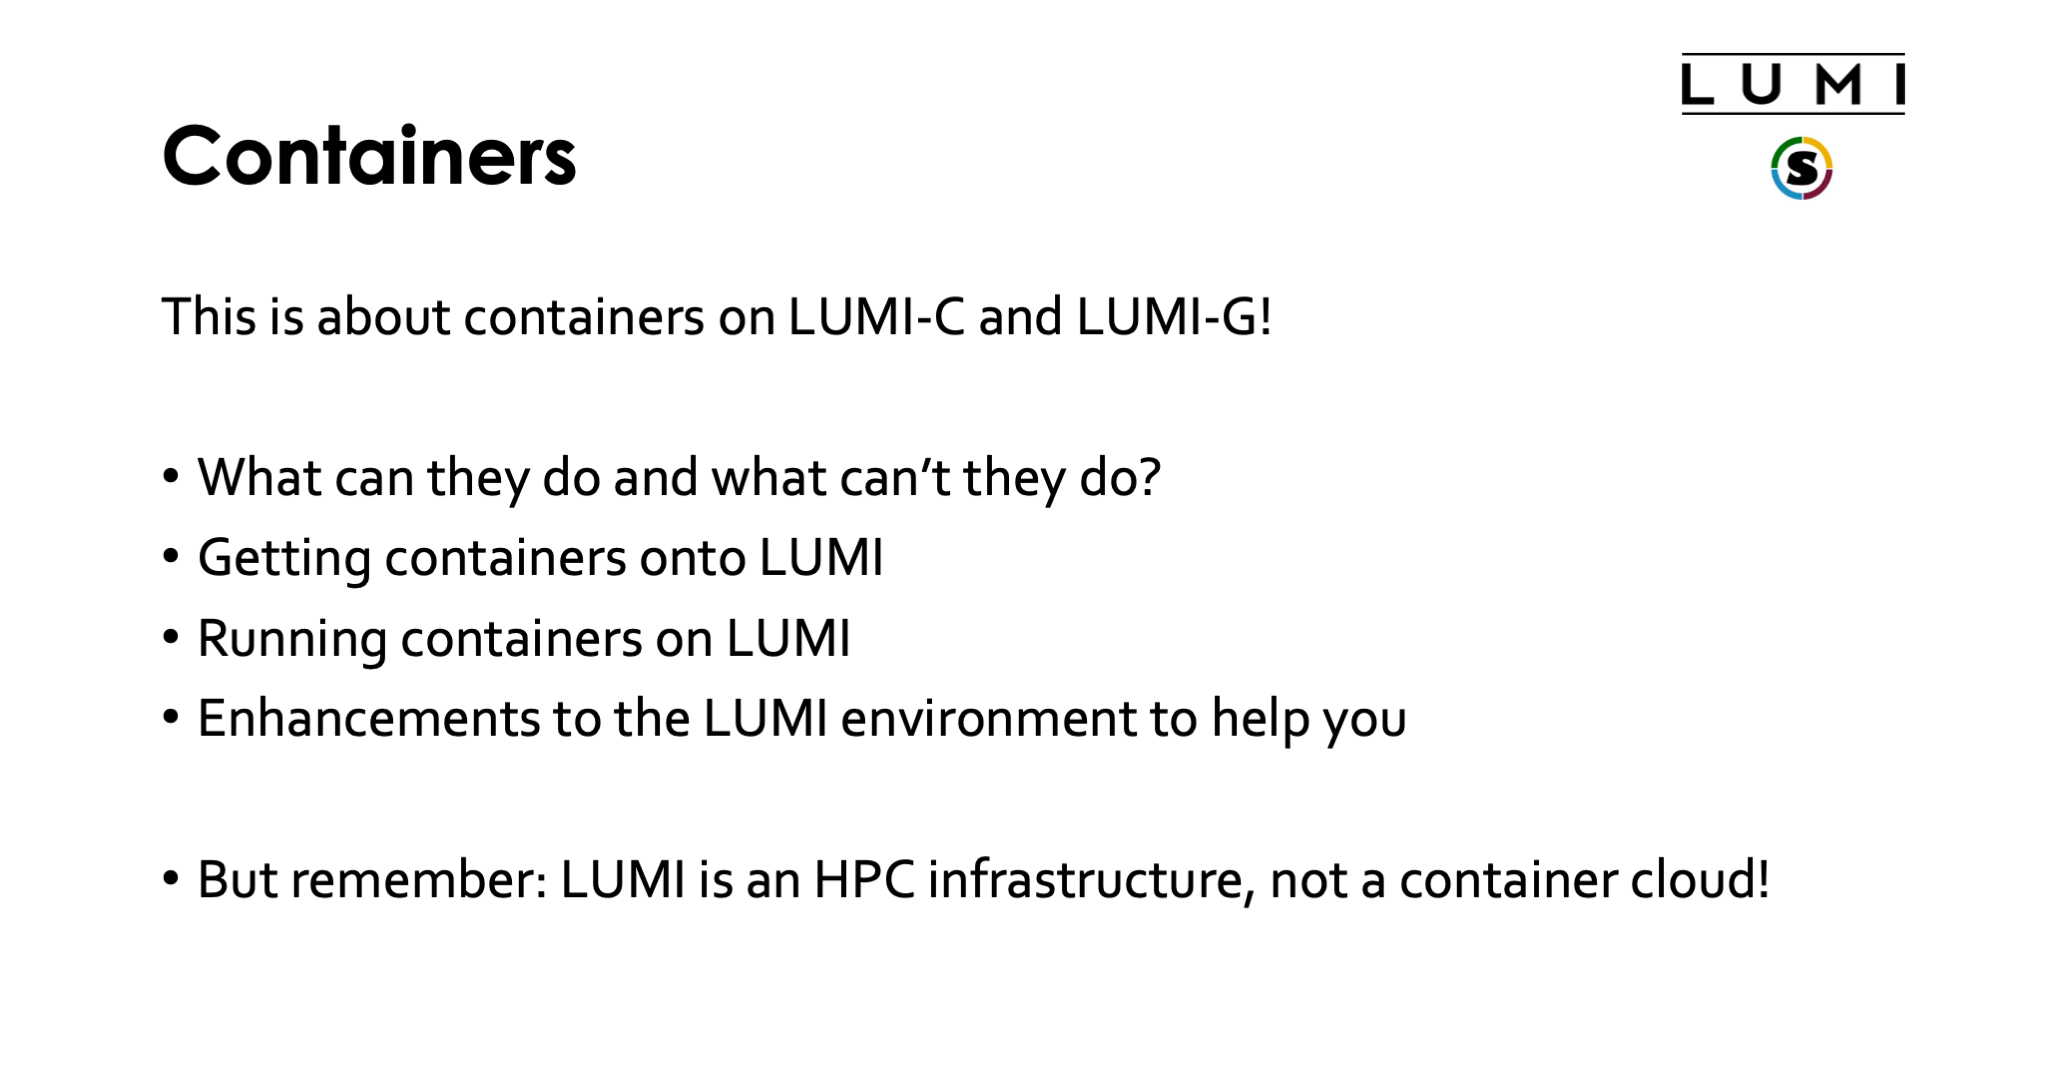 Containers on LUMI